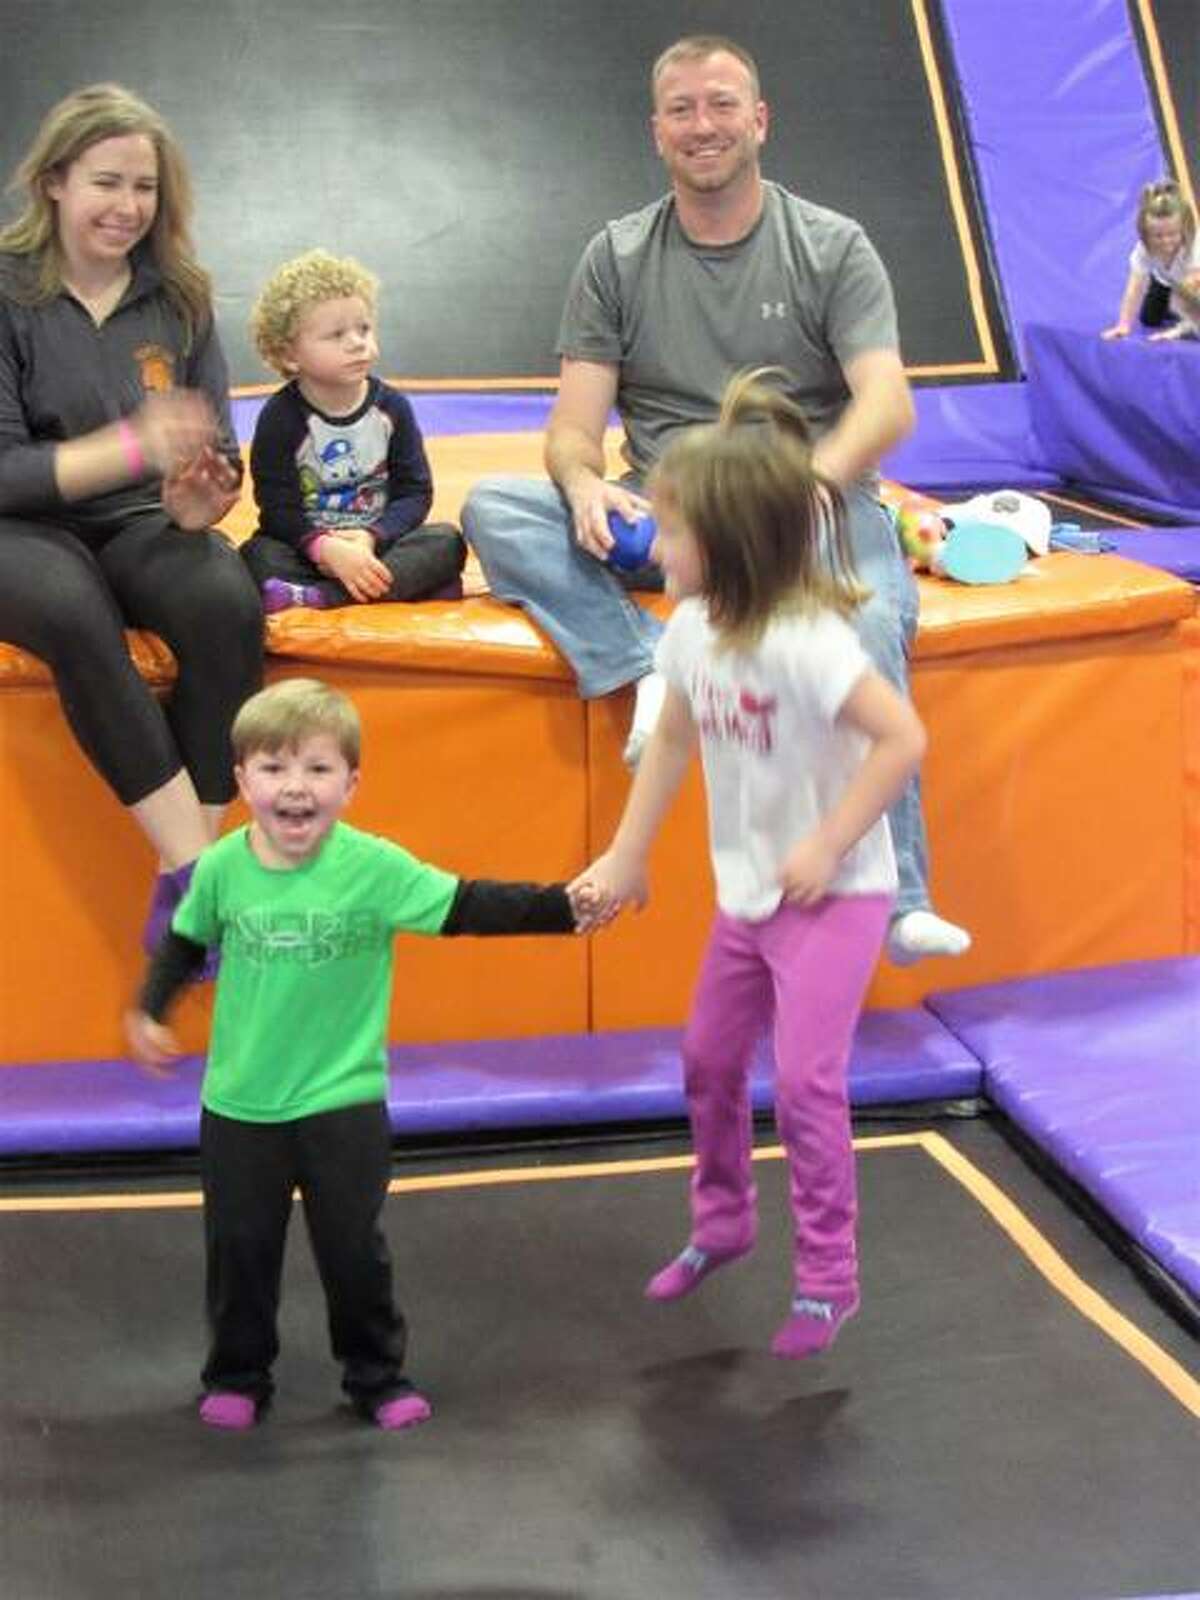 Jimmy Grant is shown with his son, Cooper, and his daughter, Gabbie, at Altitude Trampoline Park in Glen Carbon. He said the family usually spends 60 t0 90 minutes at the trampoline park and the kids usually are “worn out” by the end of their time there.